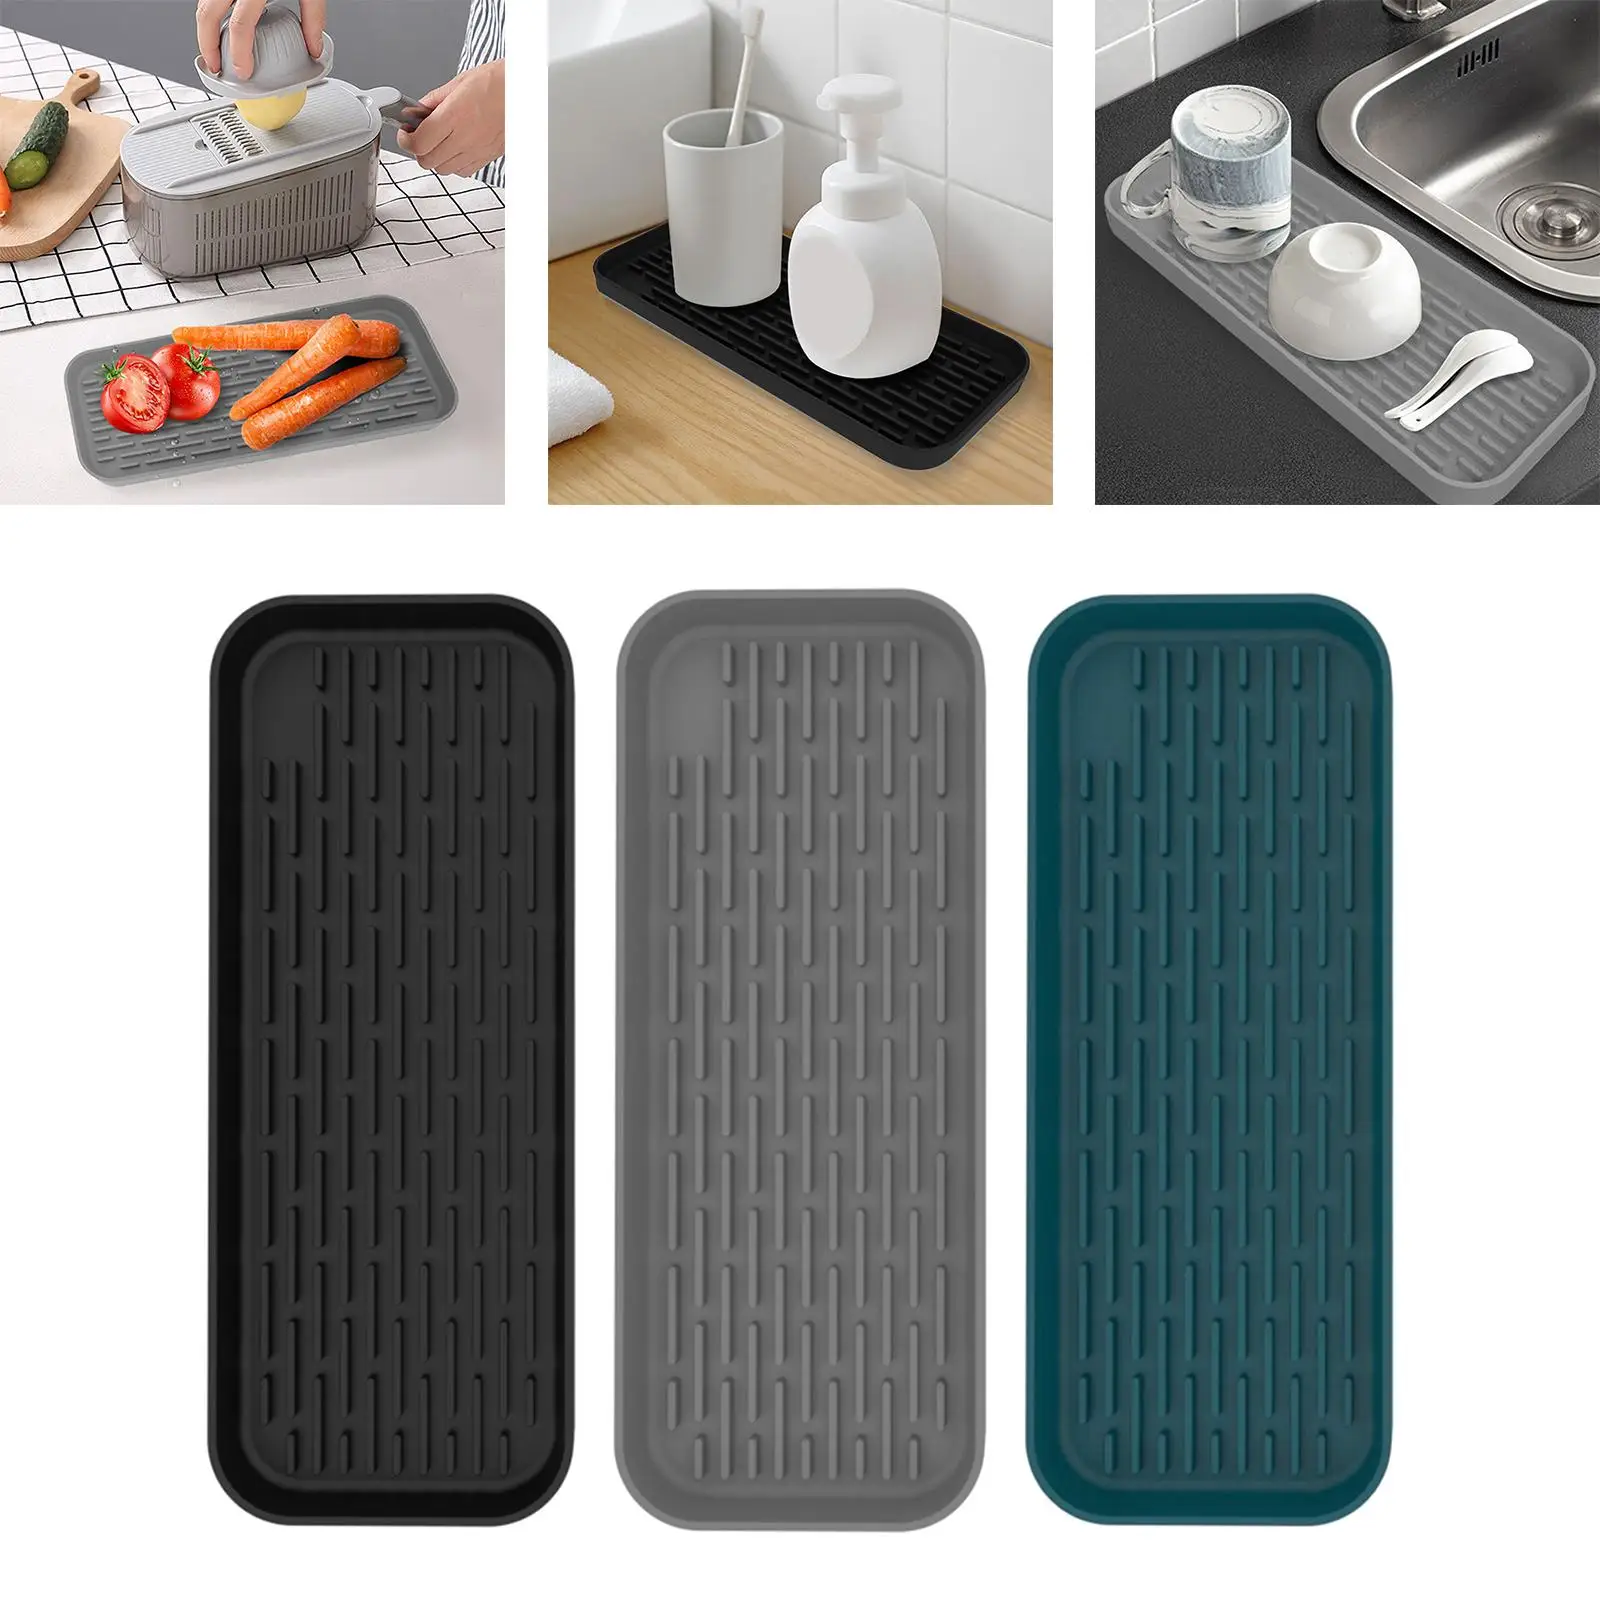 Silicone Tray Kitchen Storage Tray Waterproof Protector Mats Tableware Drip Tray Heat Resistant for Home Countertop Bathroom